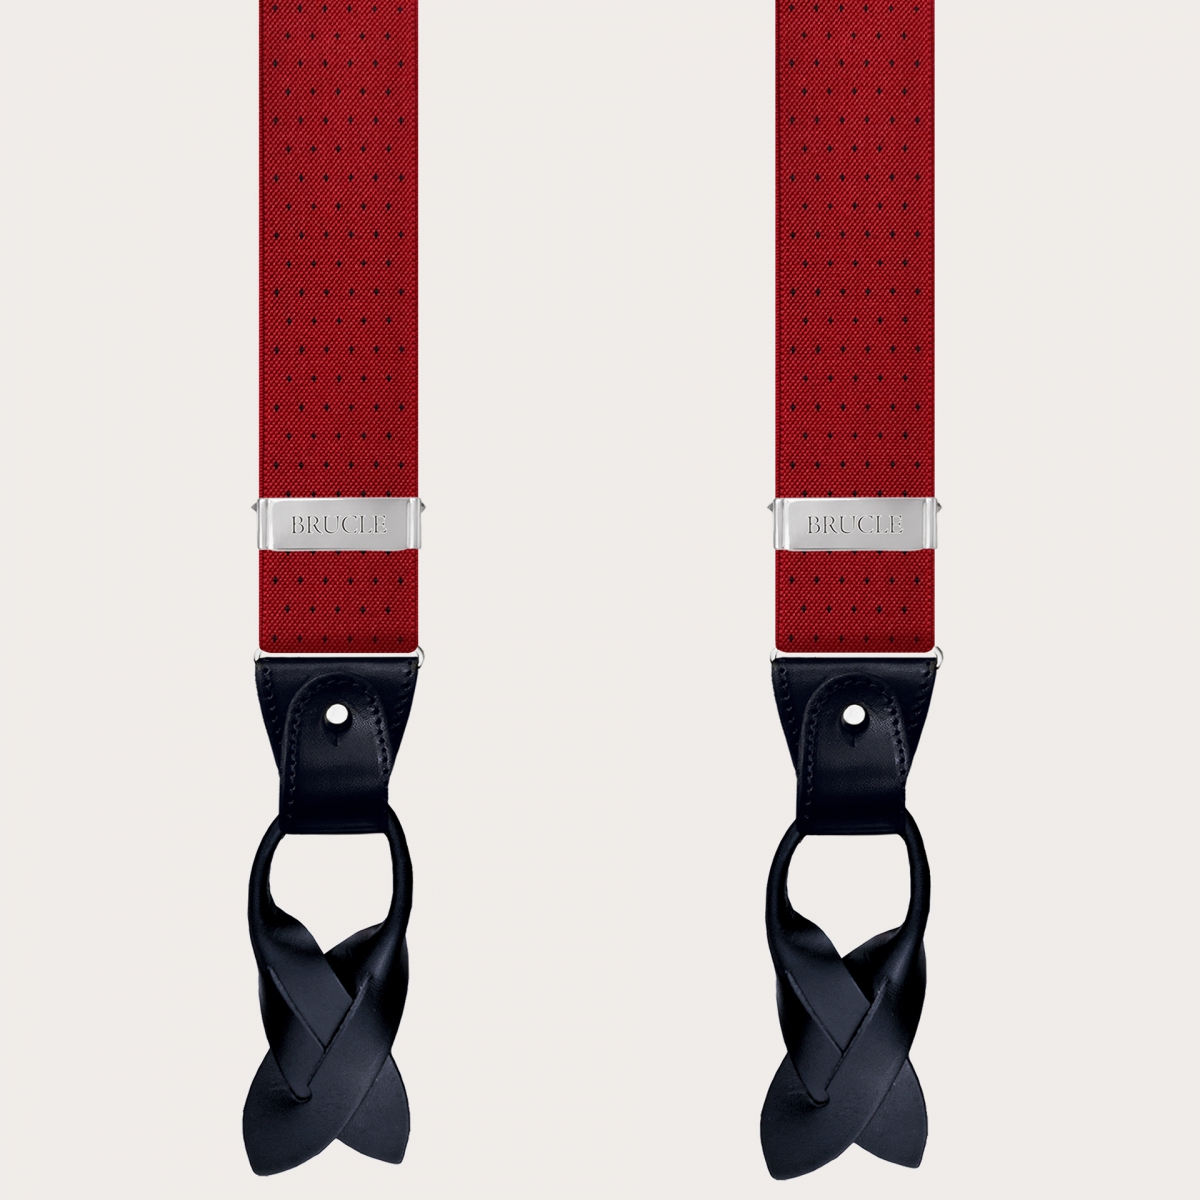 BRUCLE Y-shape red elastic suspenders with dotted pattern